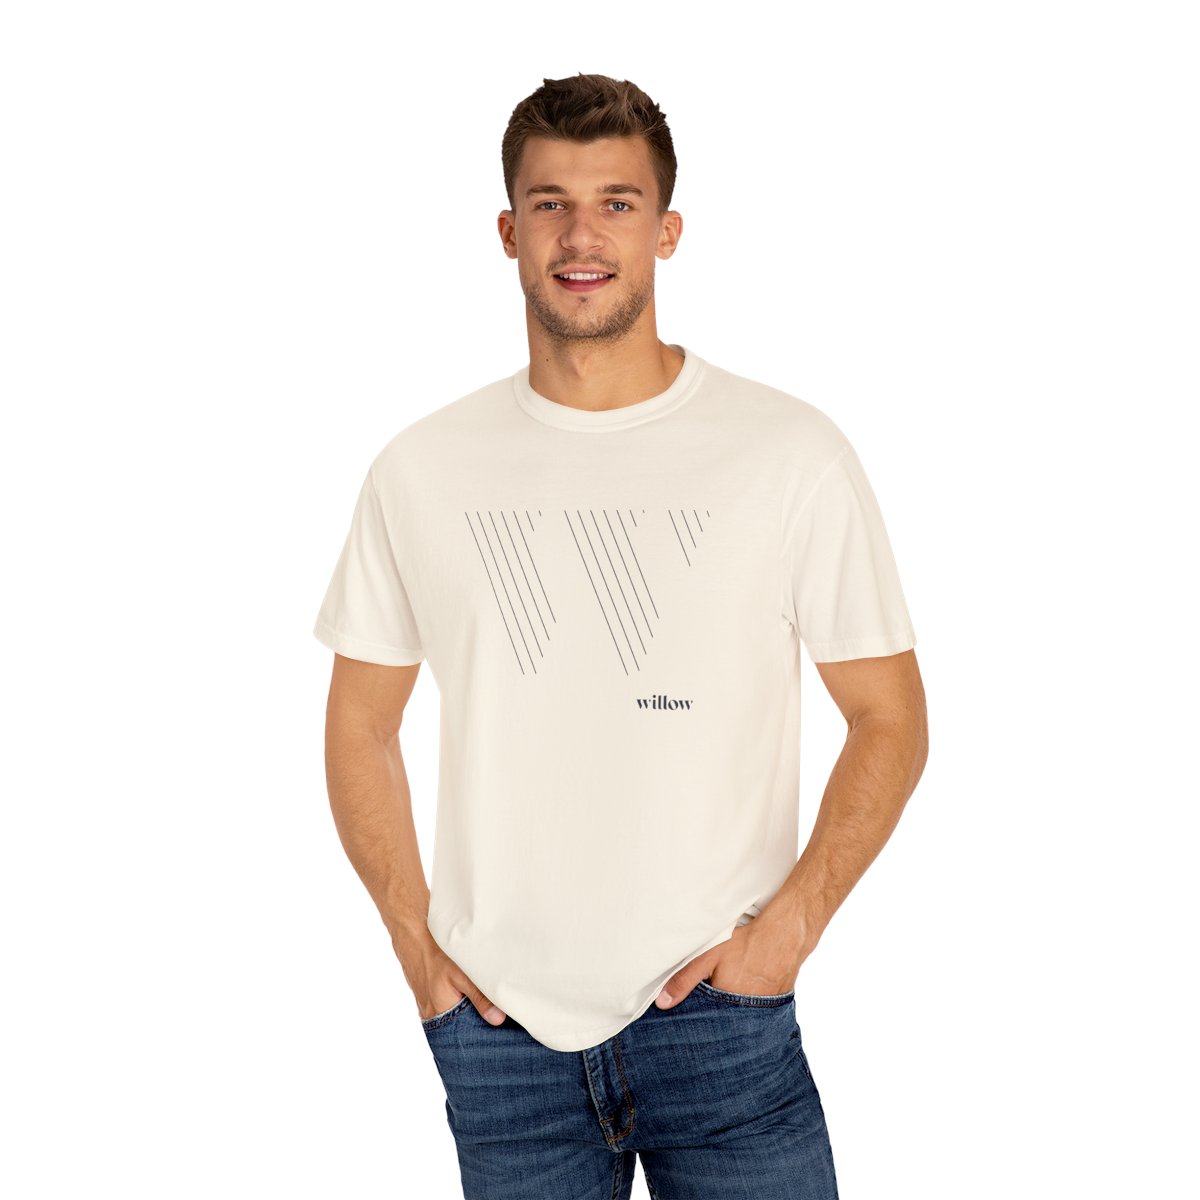 Lined W T-Shirt product thumbnail image